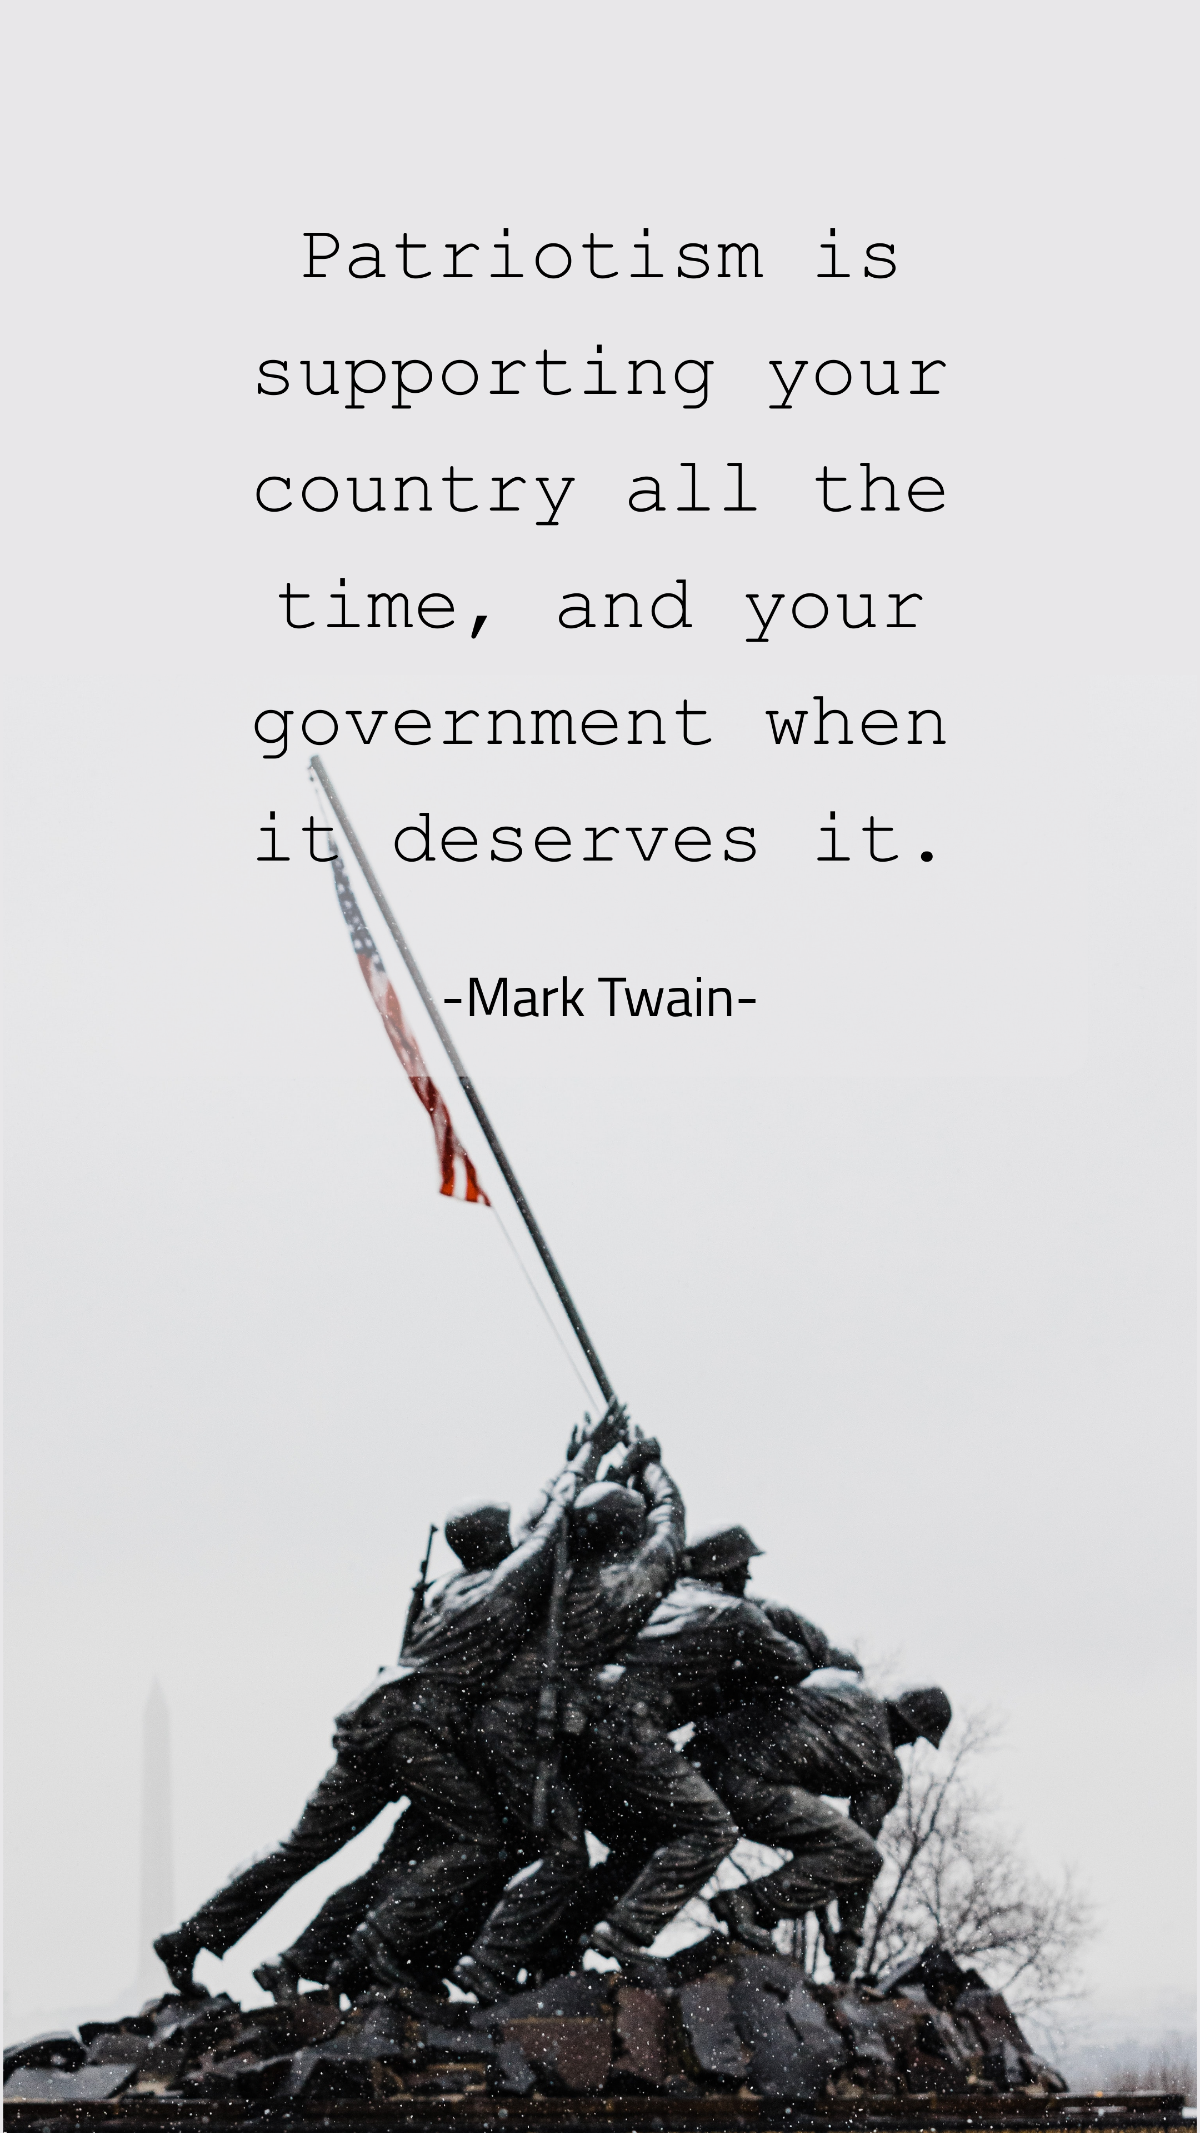 Free Mark Twain - Patriotism is supporting your country all the time, and your government when it deserves it. Template